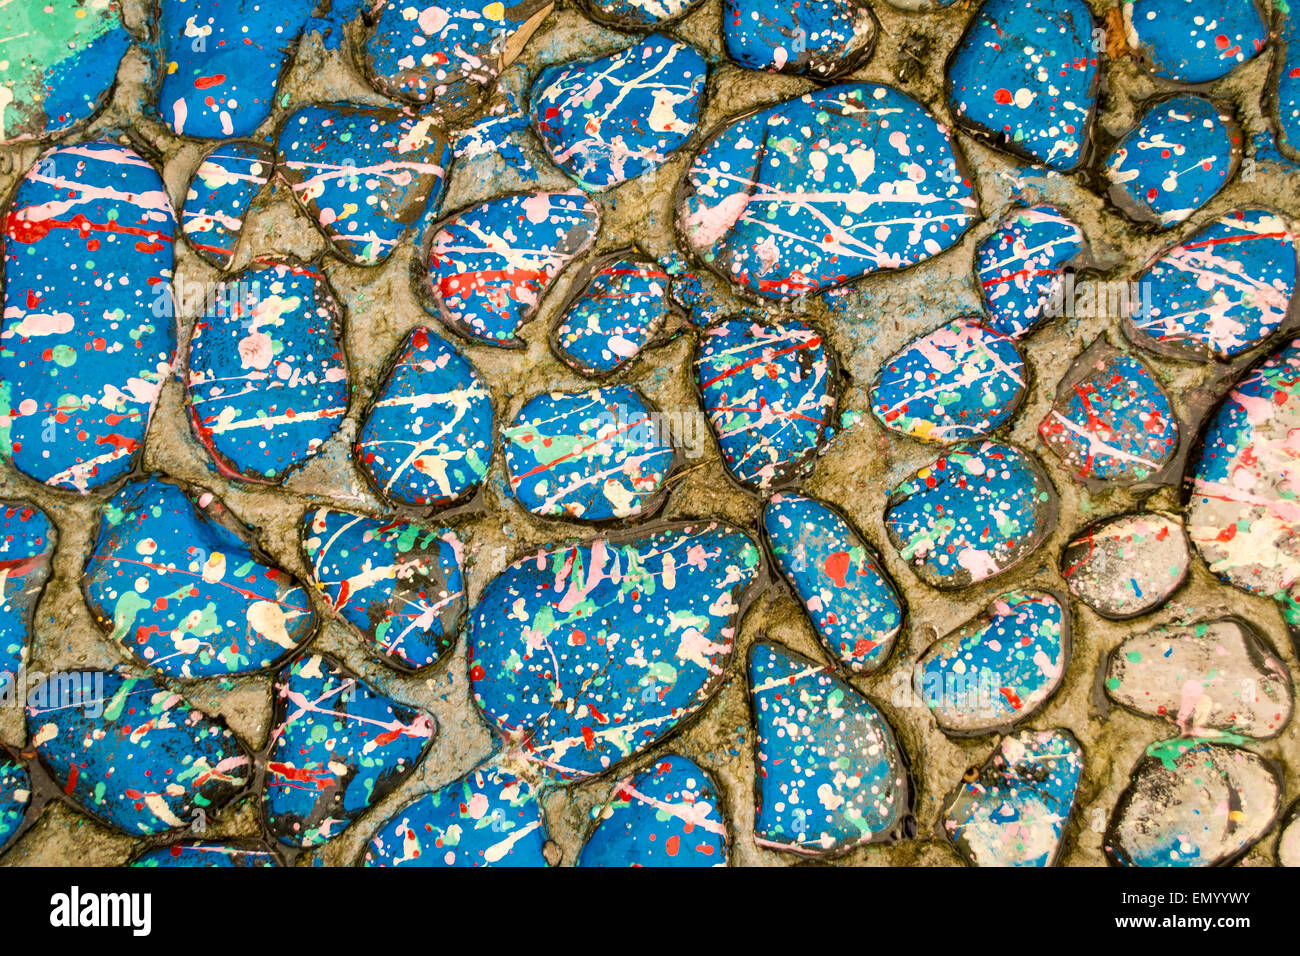 Stones covered in paint drops and drips creating a distinctive splatter pattern Stock Photo